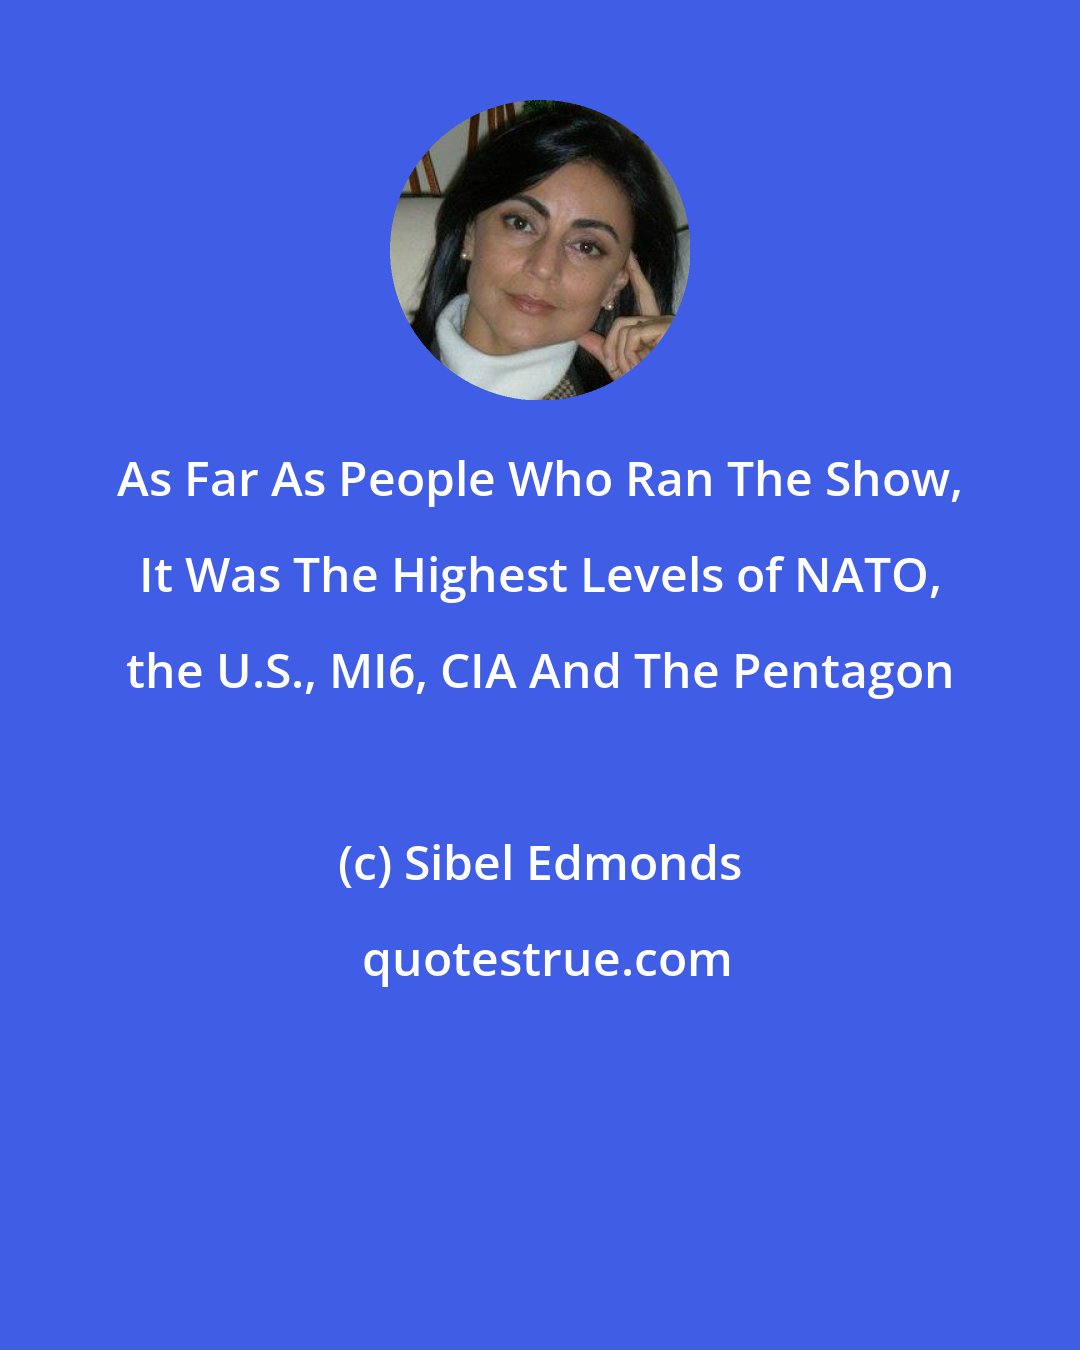 Sibel Edmonds: As Far As People Who Ran The Show, It Was The Highest Levels of NATO, the U.S., MI6, CIA And The Pentagon